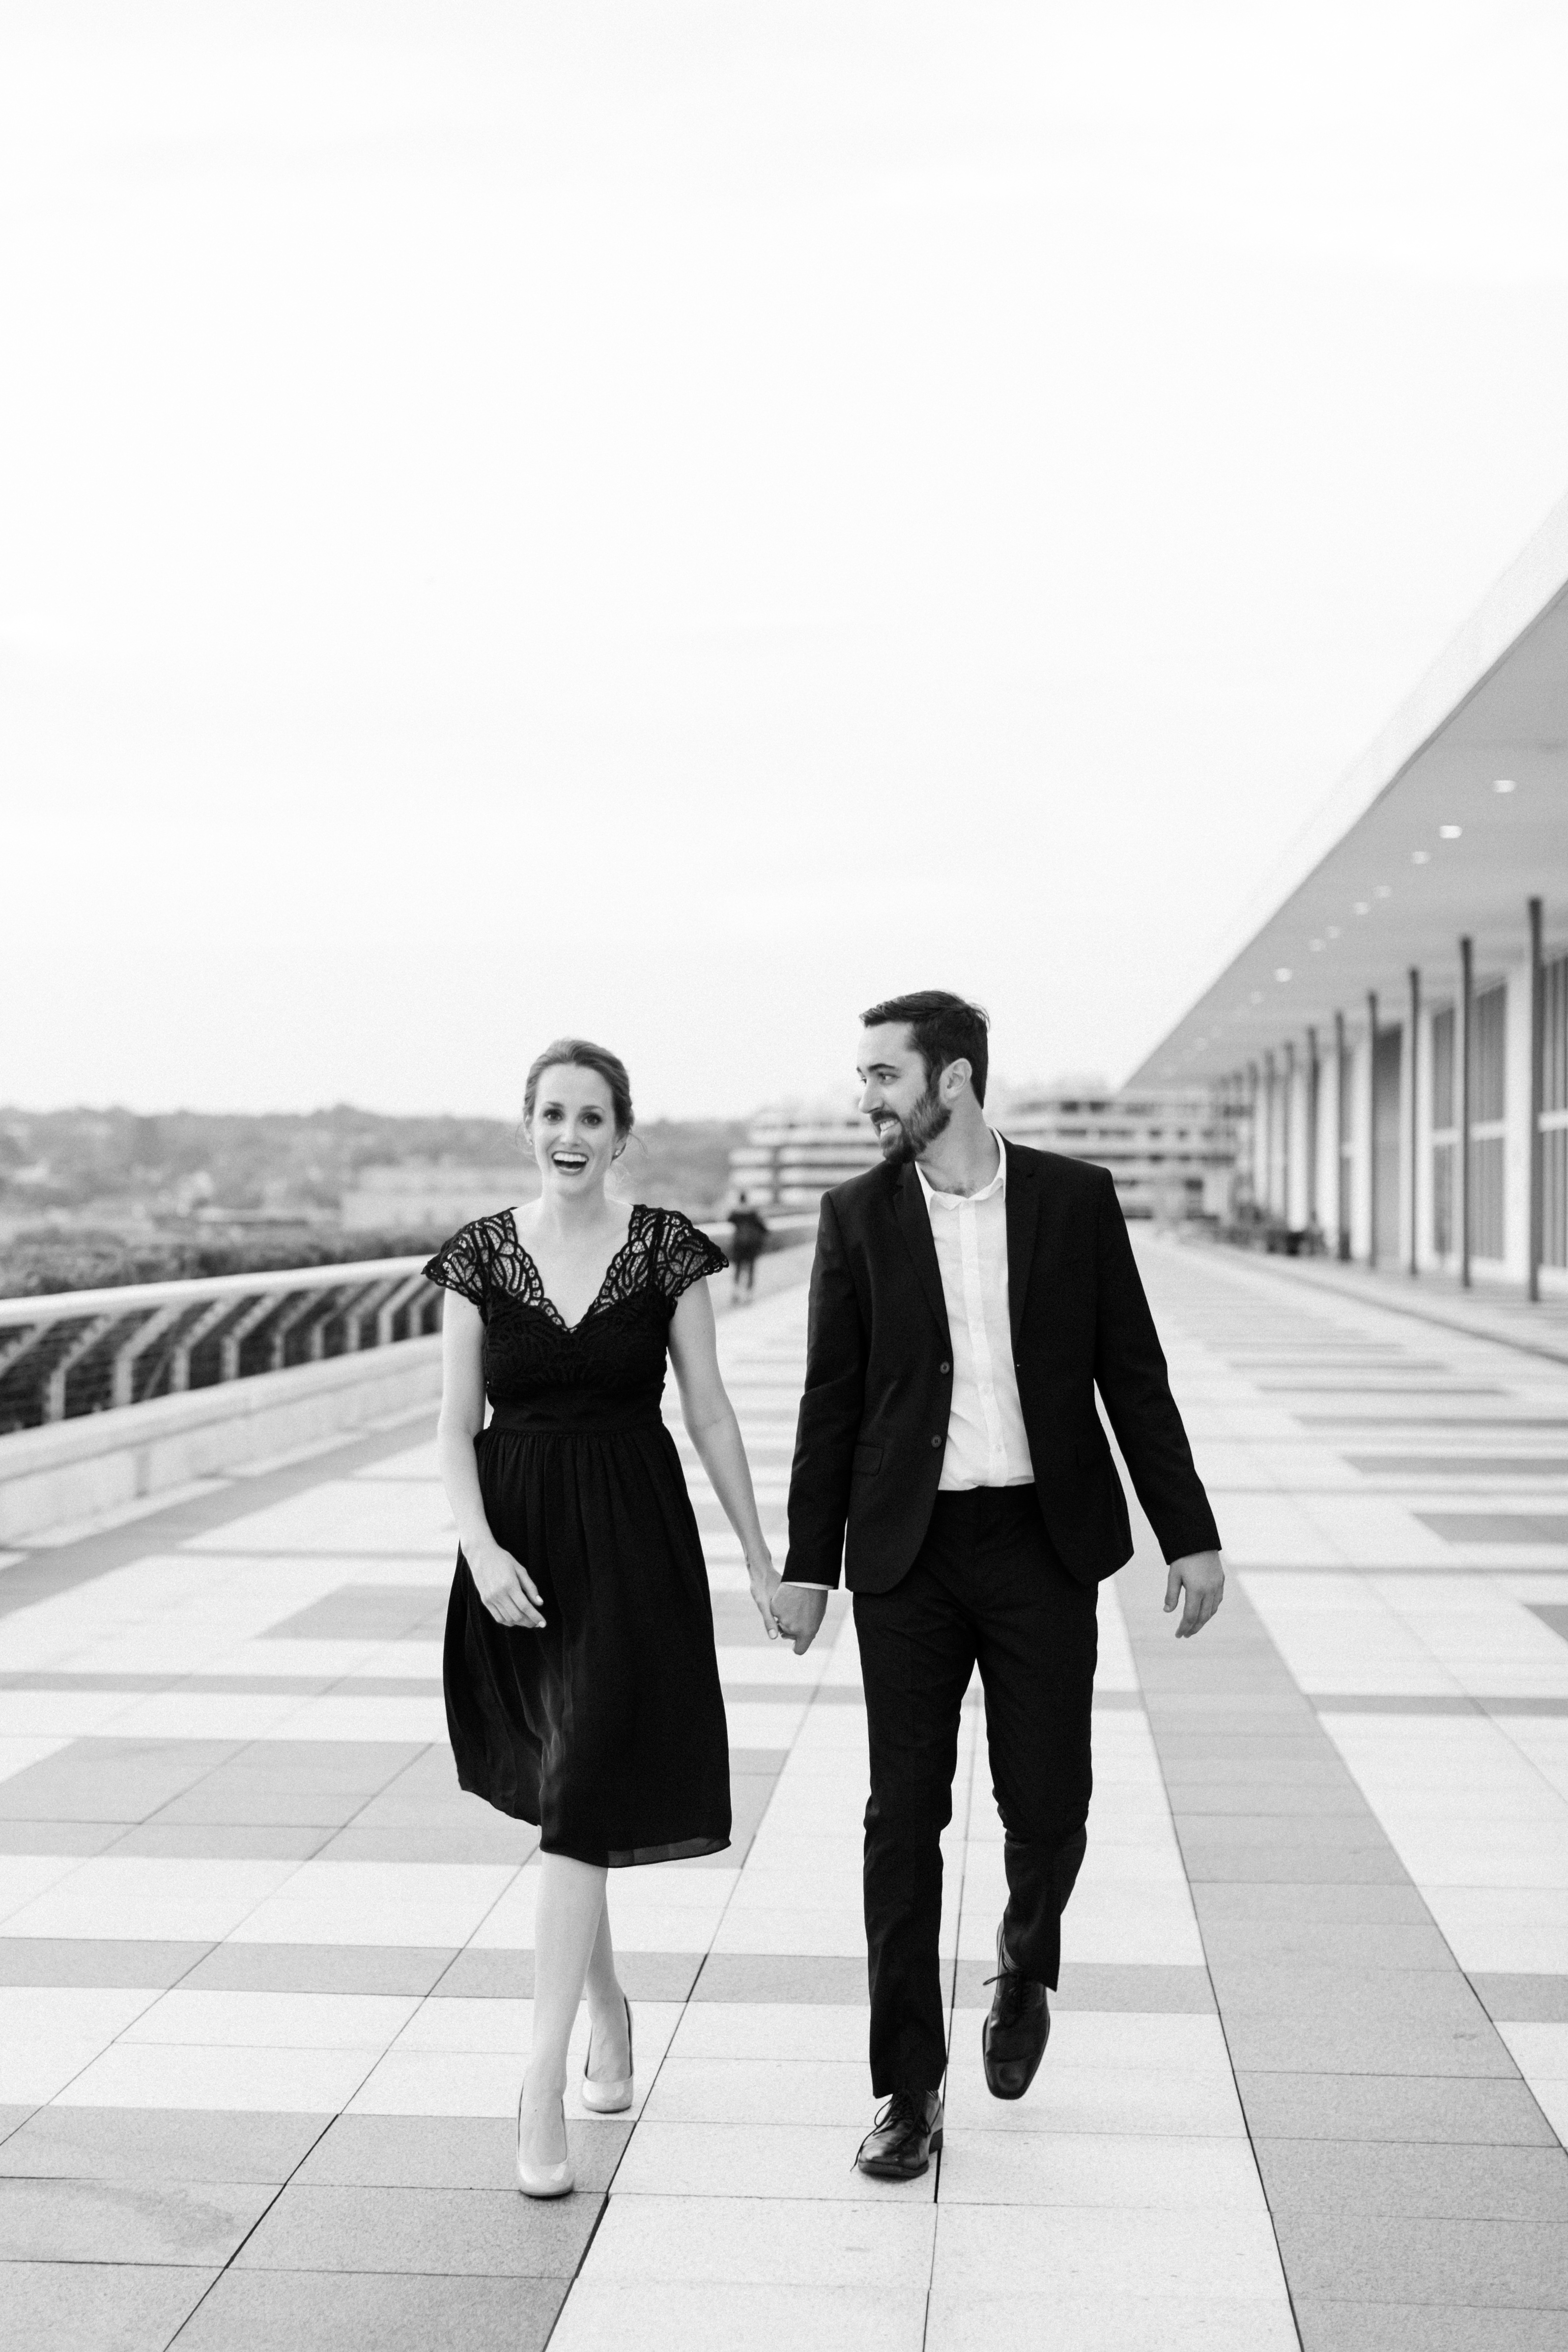 Formal Engagement Portraits at Kennedy Center in DC, Black Tie Evening Engagement Session at Kennedy Center and Memorial Bridge, Sarah Bradshaw Photography